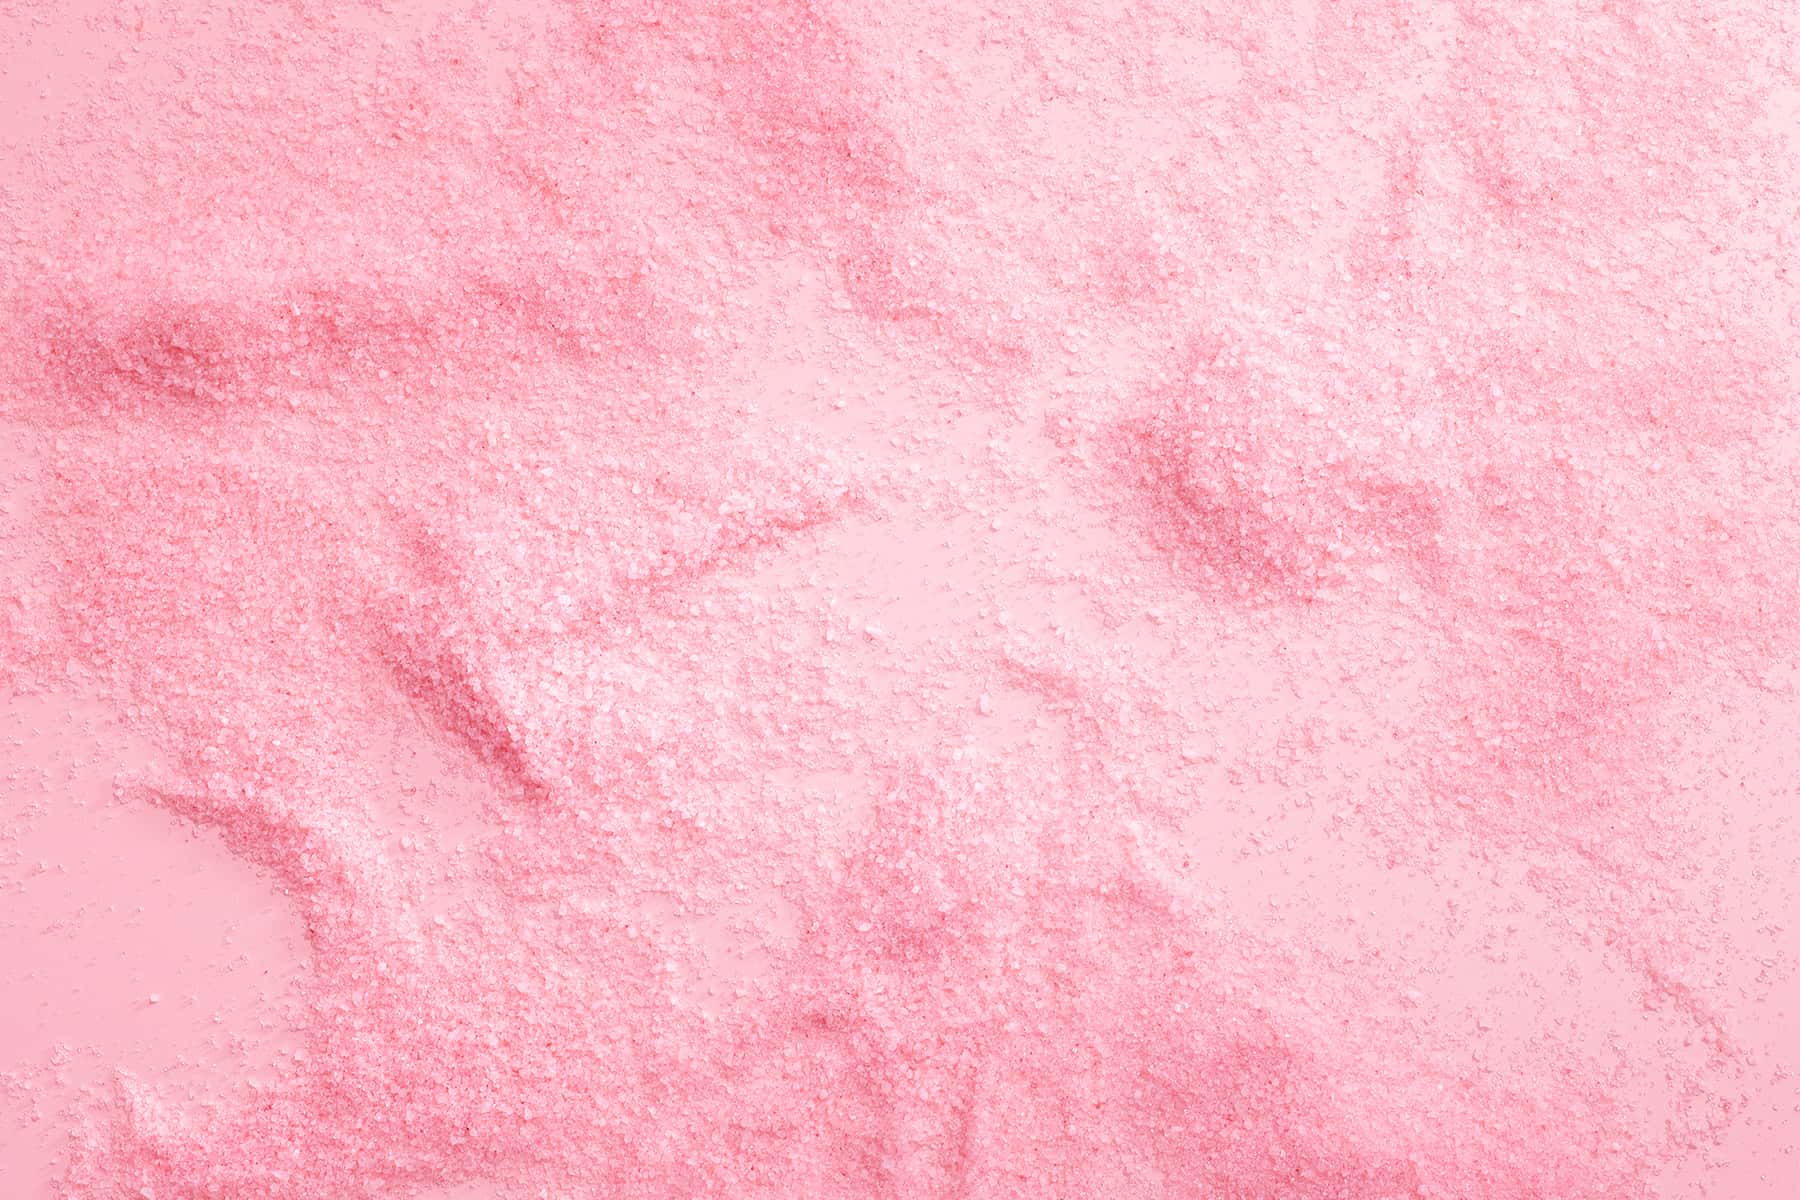 Pink grains of sand texture